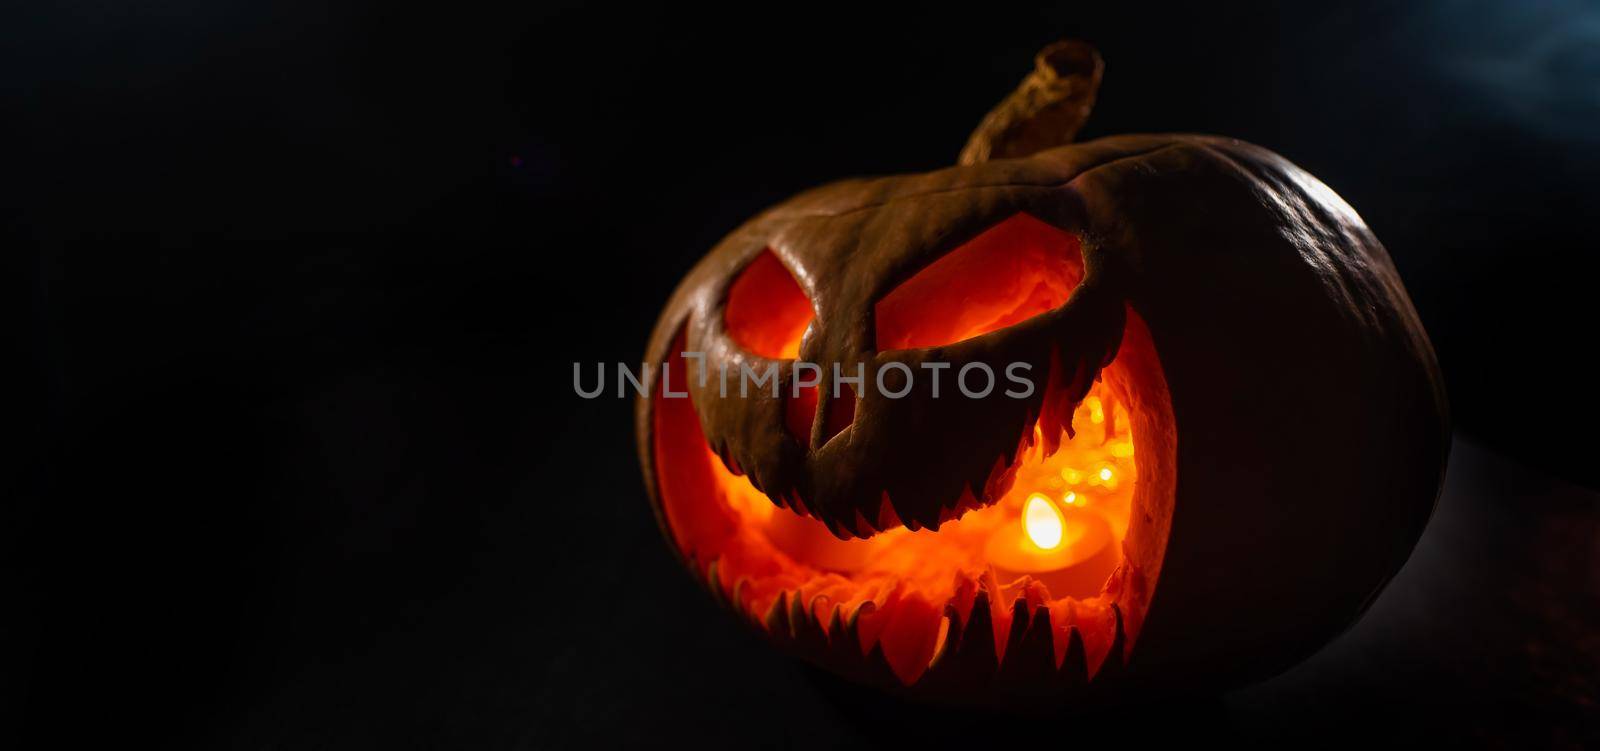 A creepy pumpkin with a carved grimace glows. Jack on a lantern in the dark